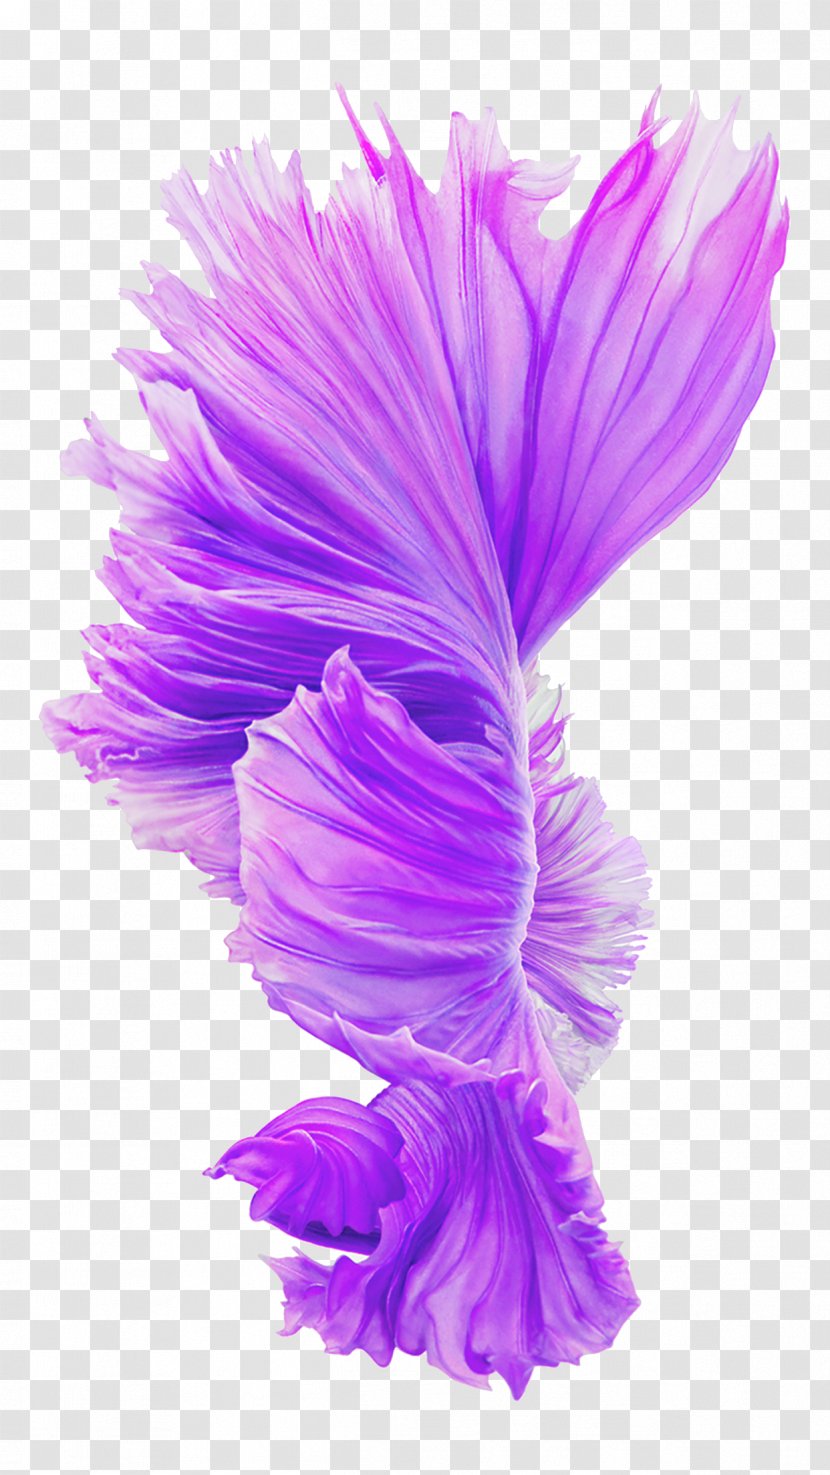 IPhone 6s Plus 6 4S IOS LTE - Mobile Device - Purple Flowers Blooming Transparent PNG